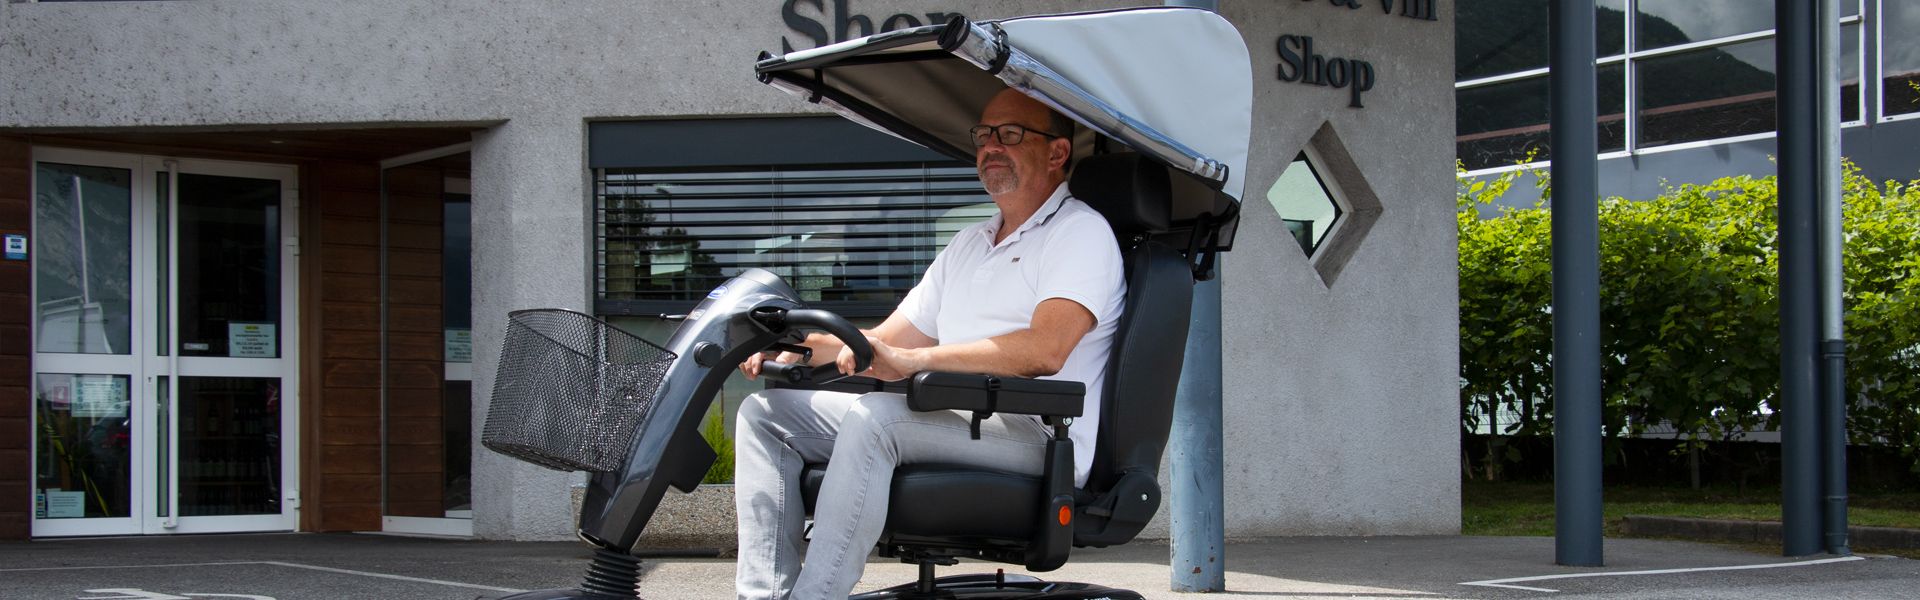 veltop-modulo-sun-2-sun-protection-for-mobility-scooter